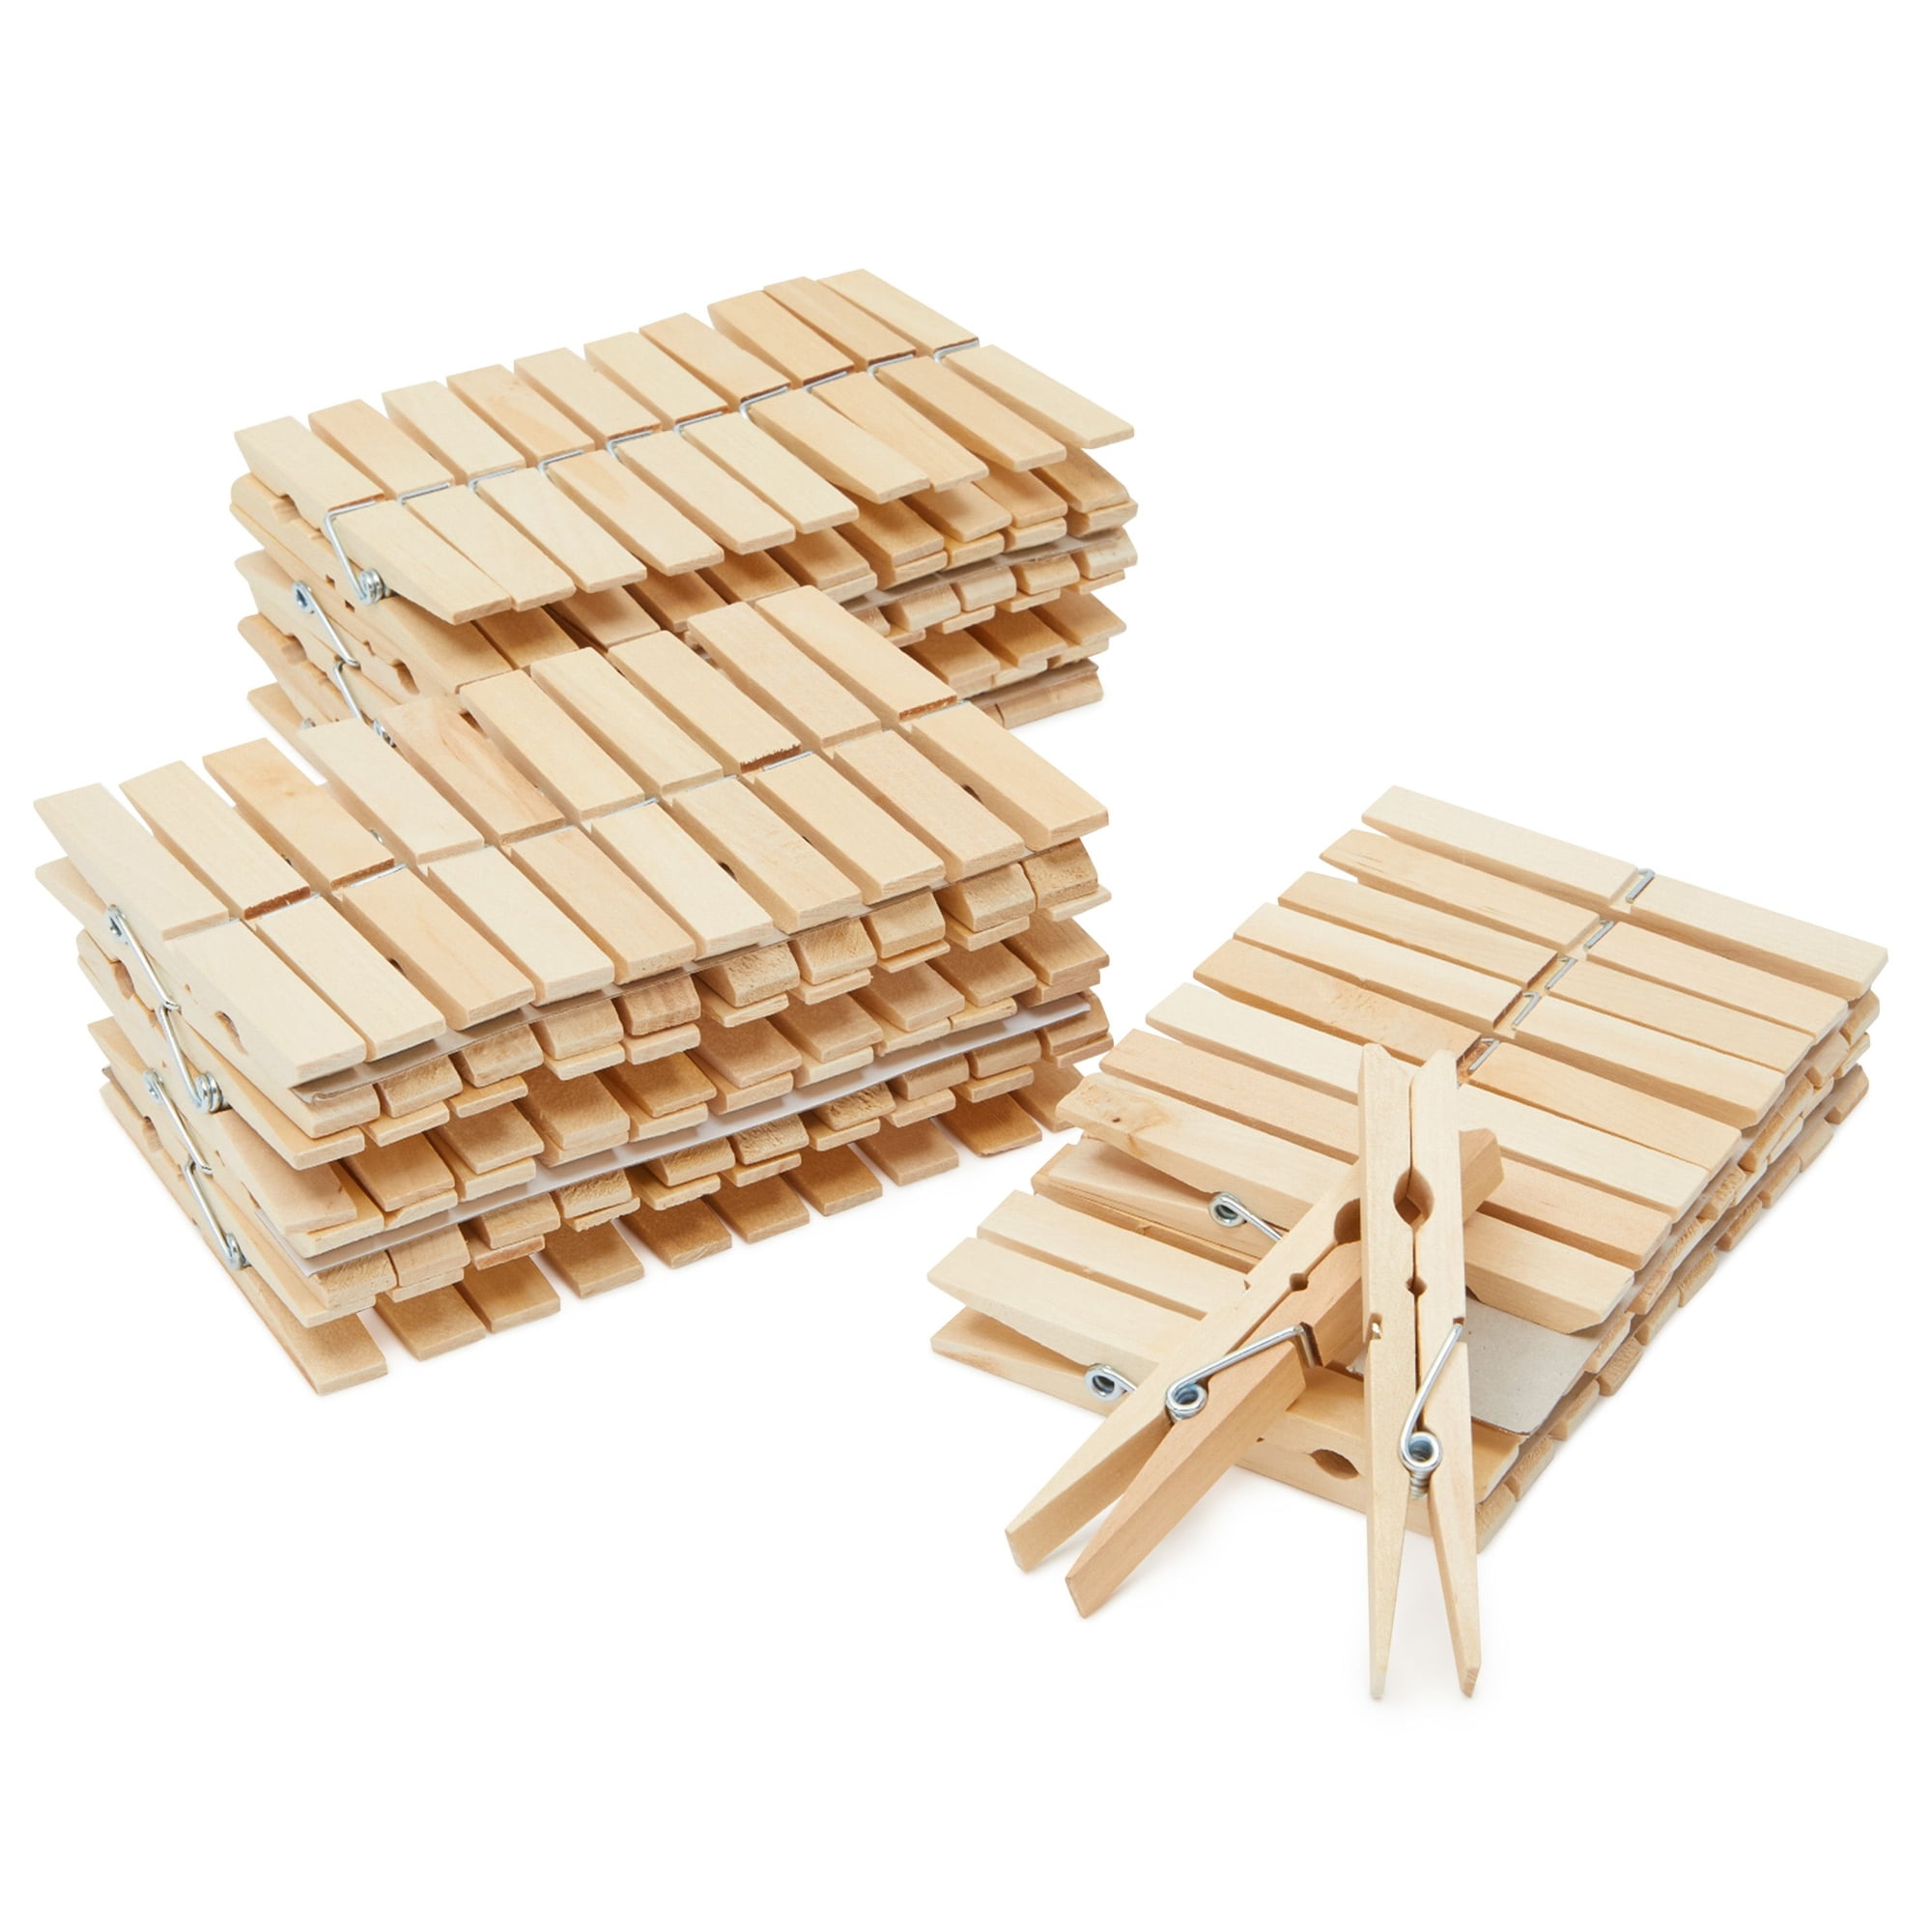 Jdesun 50pcs Wooden Photo Clips Natural Wooden Mini Laundry Pins Clothespins  Wood Picture Paper Pegs Pins